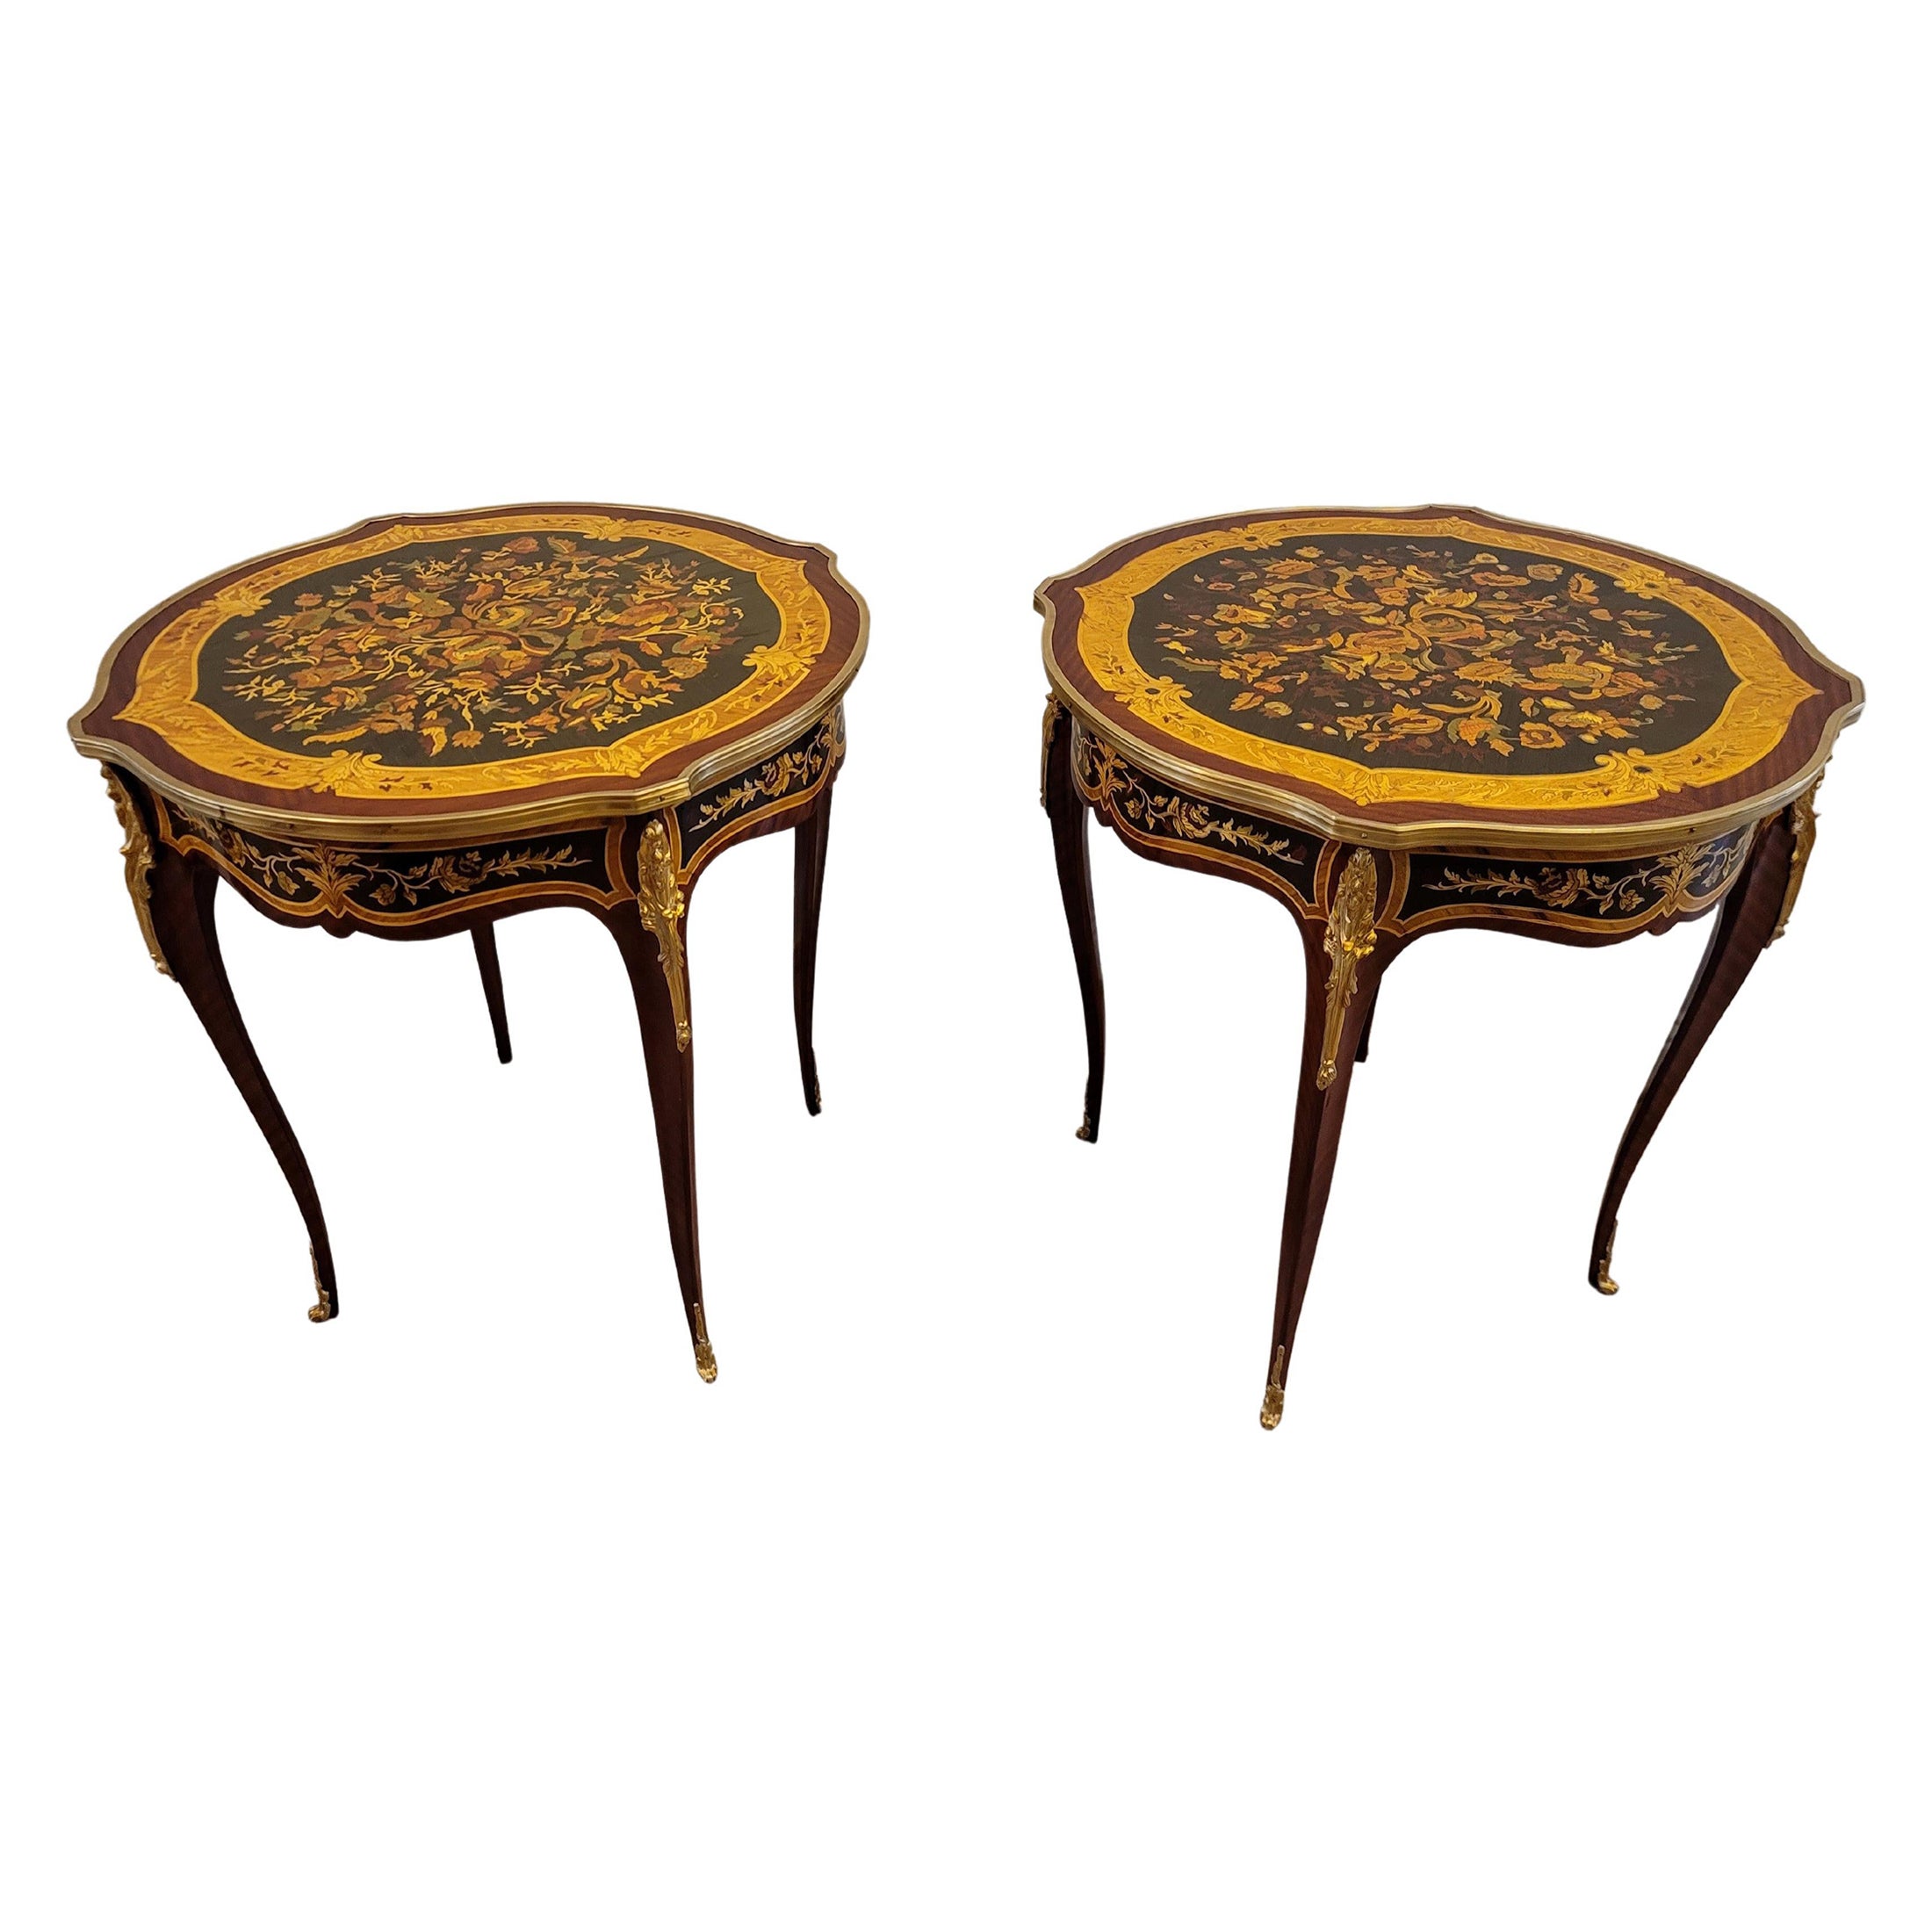 Fine Pair French Louis XV Style Gilt Bronze Mounted Floral Marquetry Side Tables For Sale